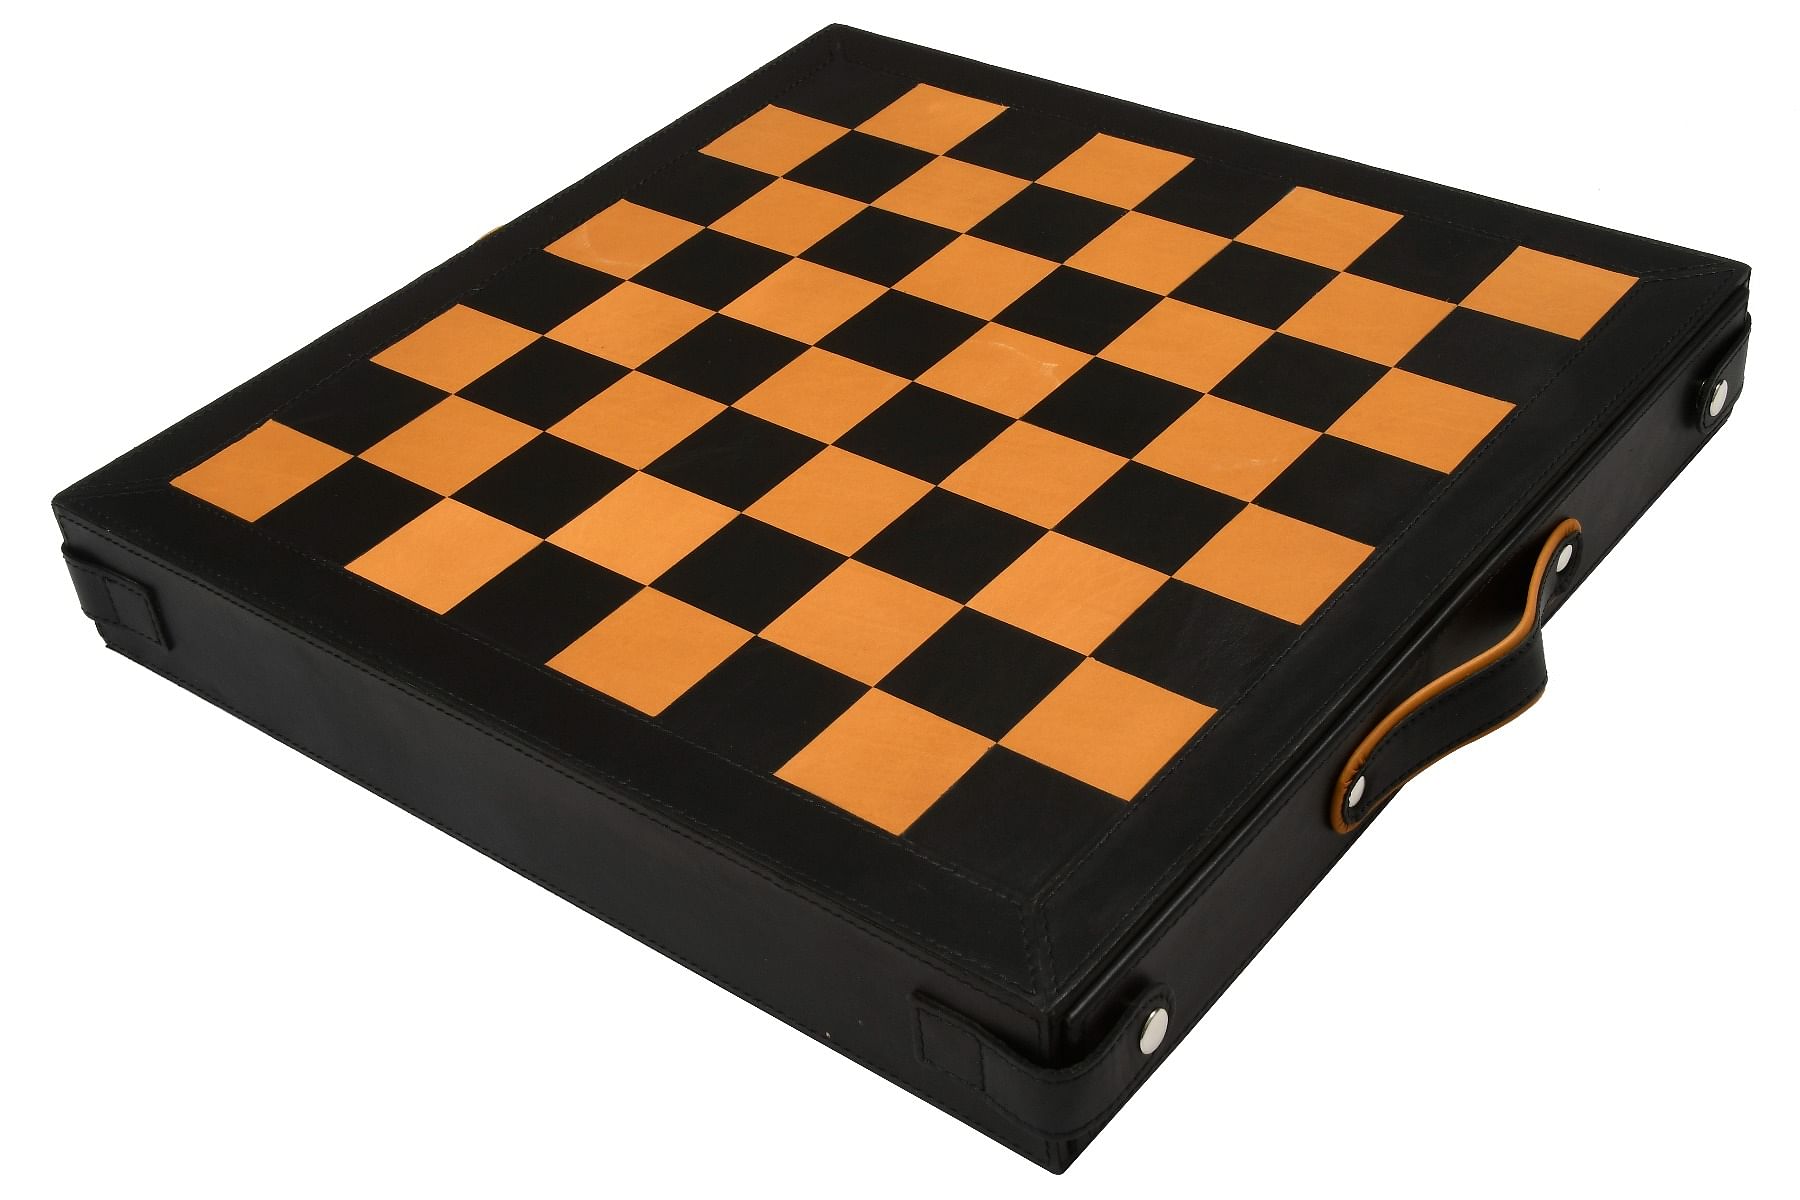 Genuine Leather Chess Board with Built-in Storage in Black Anigre & Antique Color 16